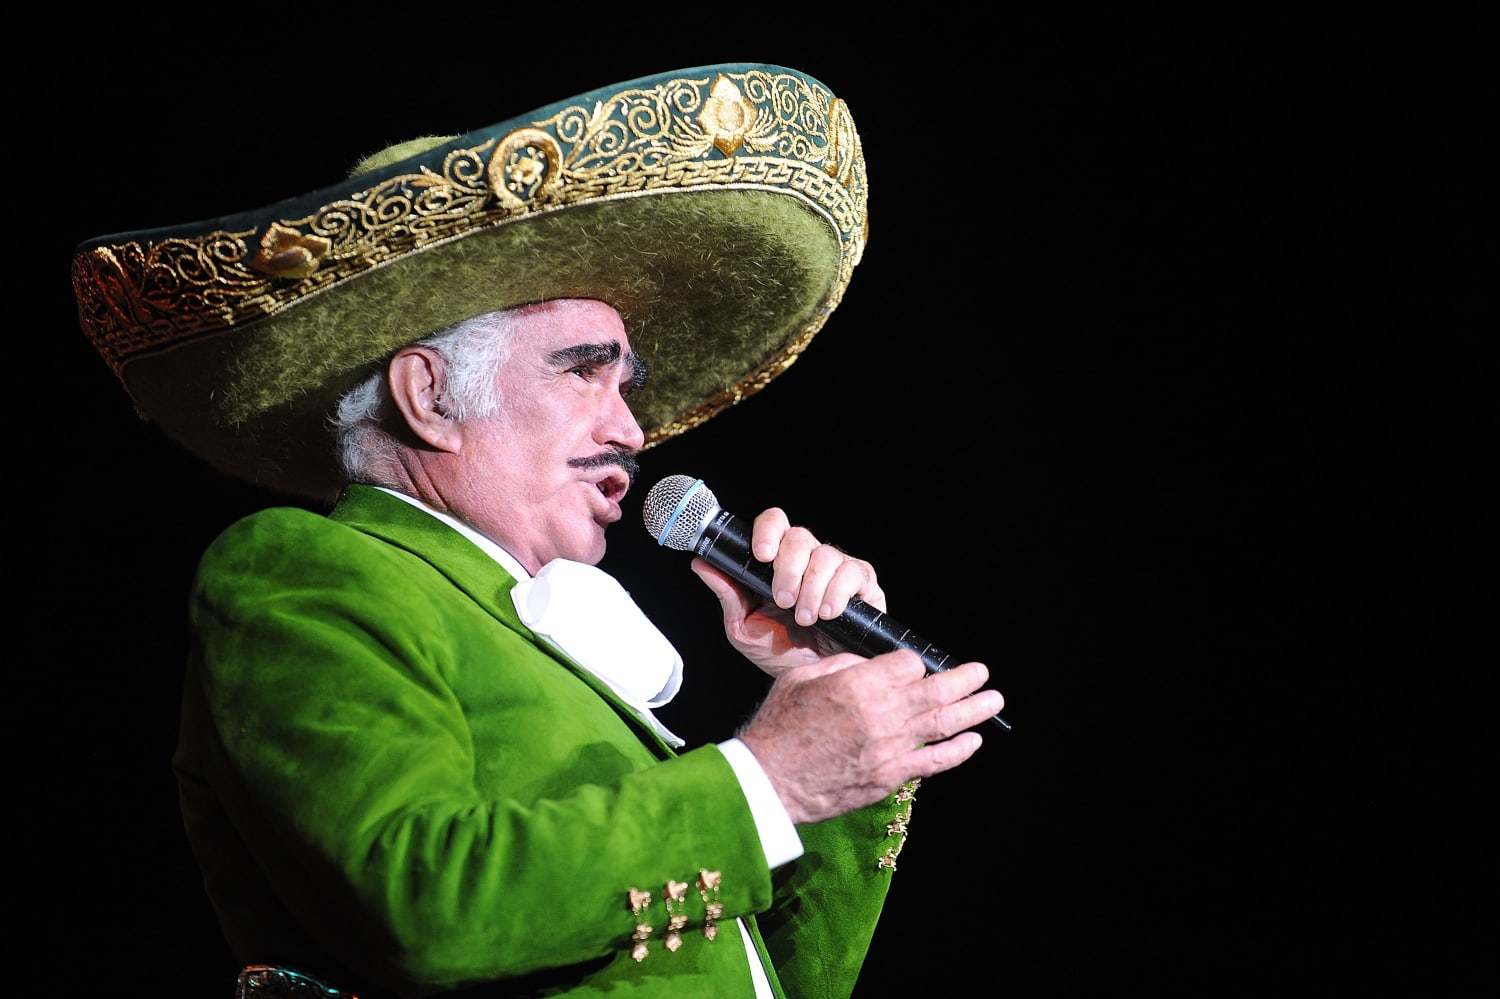 Vicente Fernández, ‘El Rey’ of ranchera music and a Mexican national treasure, has died